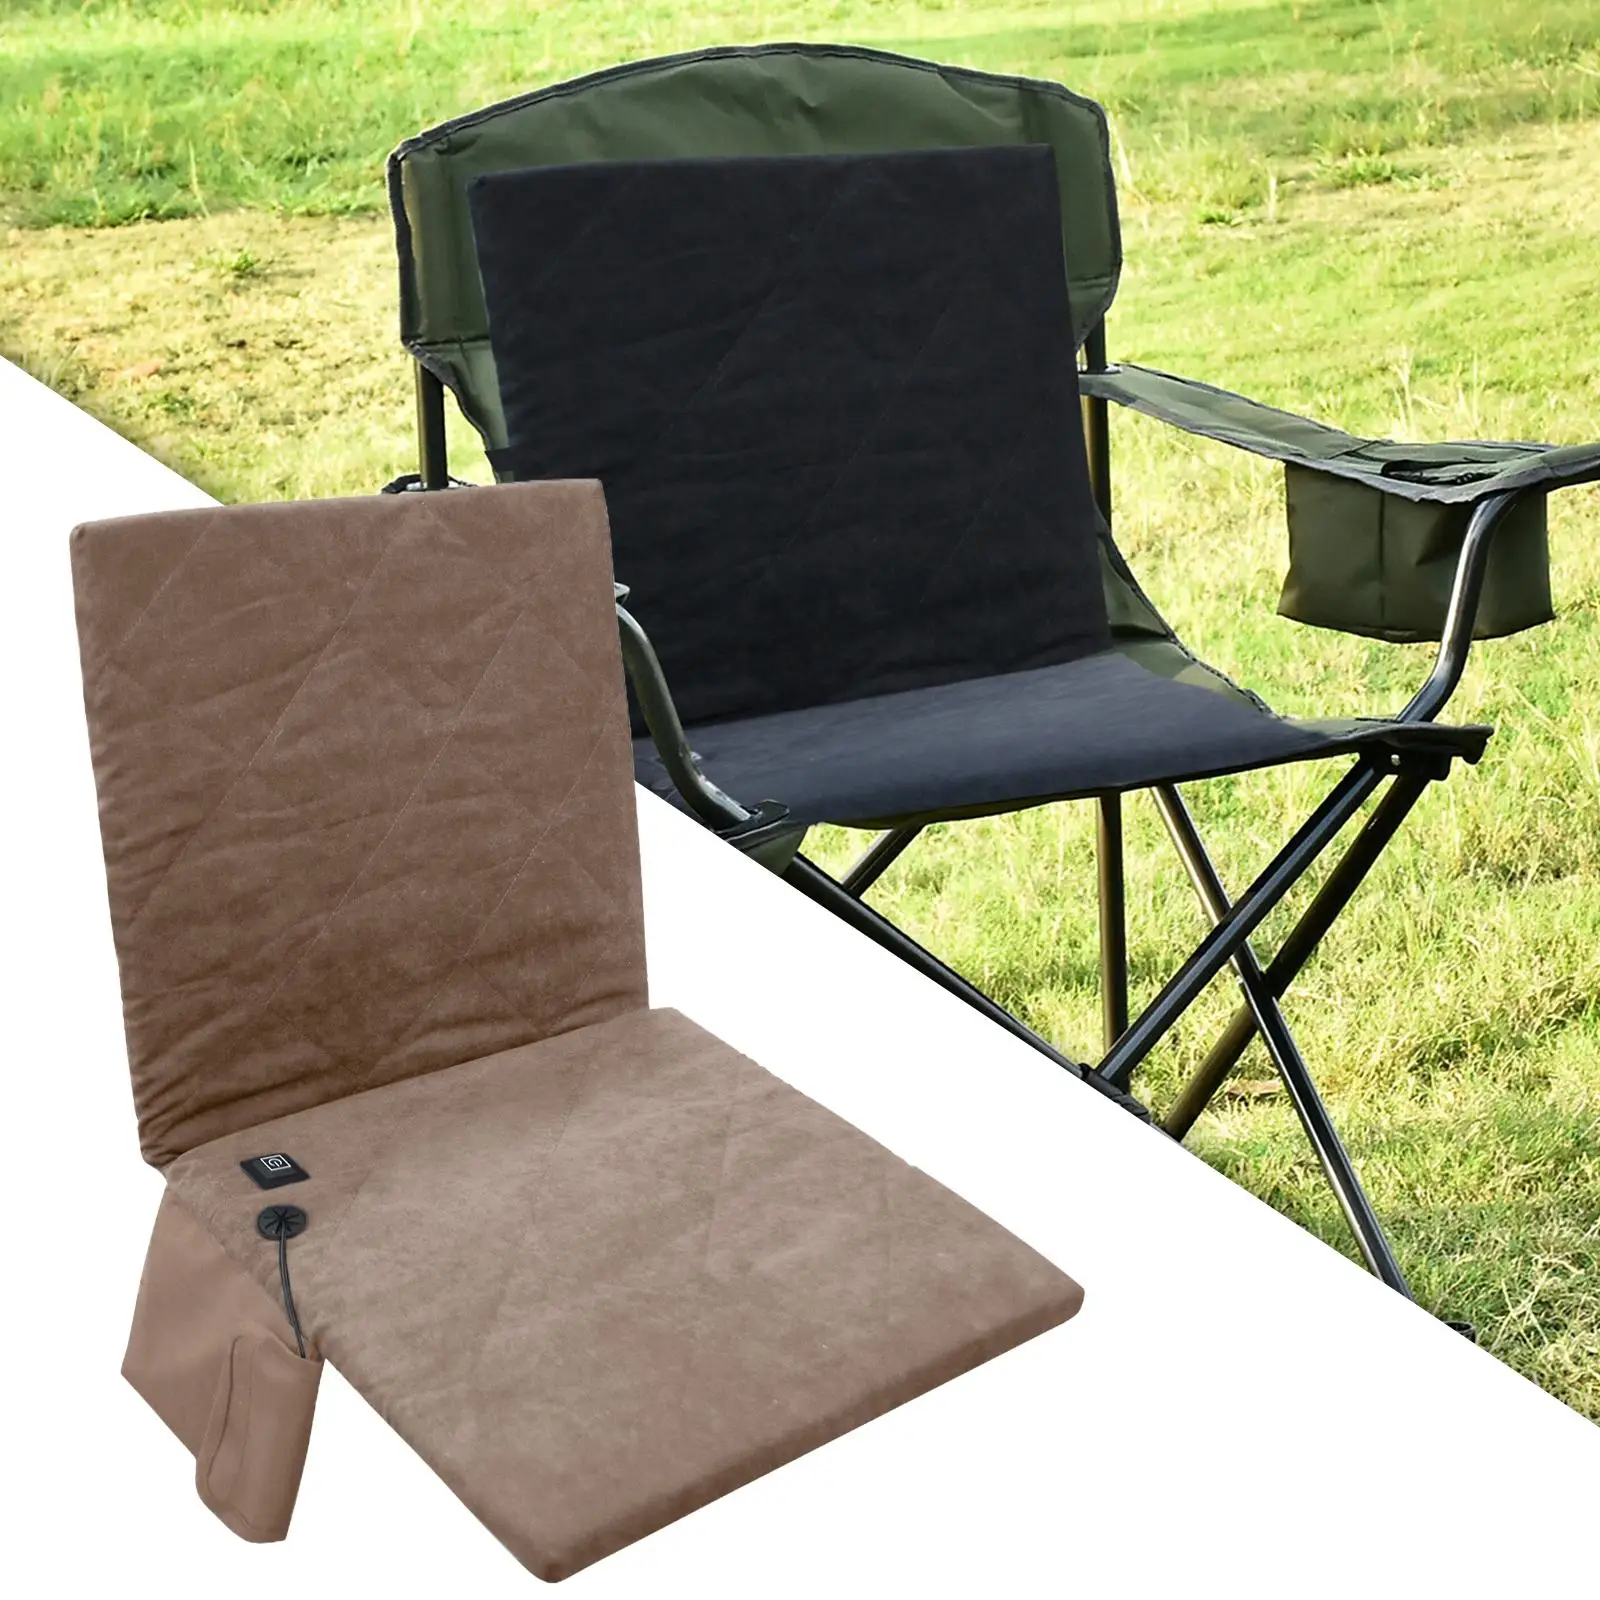 Seat Cushion Heated Warming Portable Temperature for Home Office Chair Heating Seat Pad for Fishing Lawn BBQ